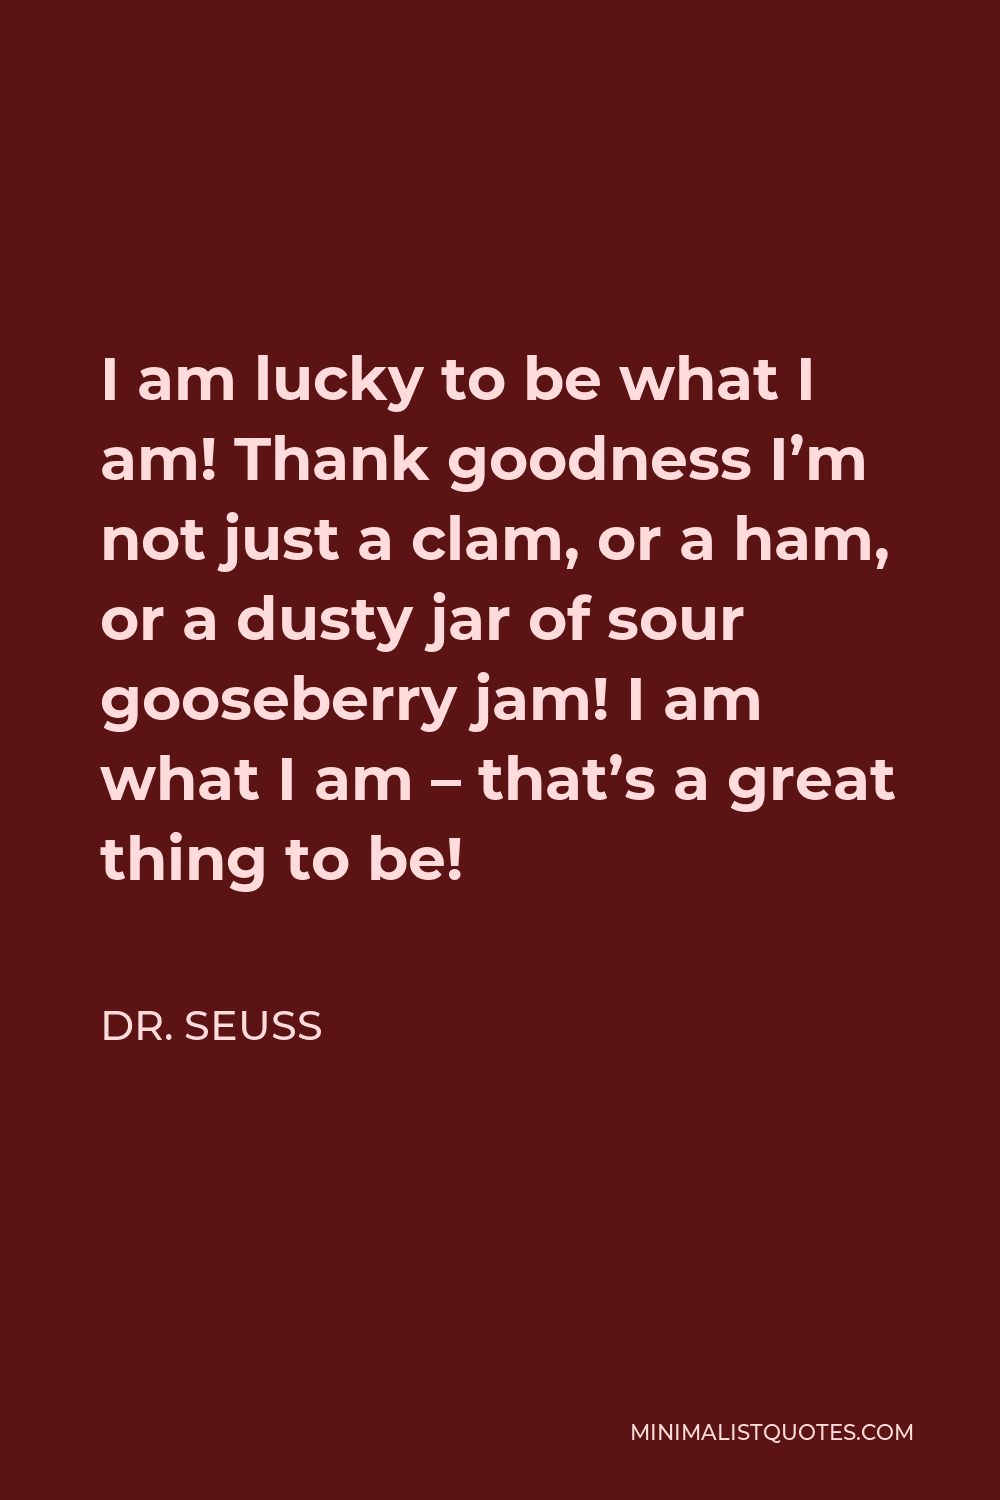 Dr. Seuss Quote - I am lucky to be what I am! Thank goodness I’m not just a clam, or a ham, or a dusty jar of sour gooseberry jam! I am what I am – that’s a great thing to be!